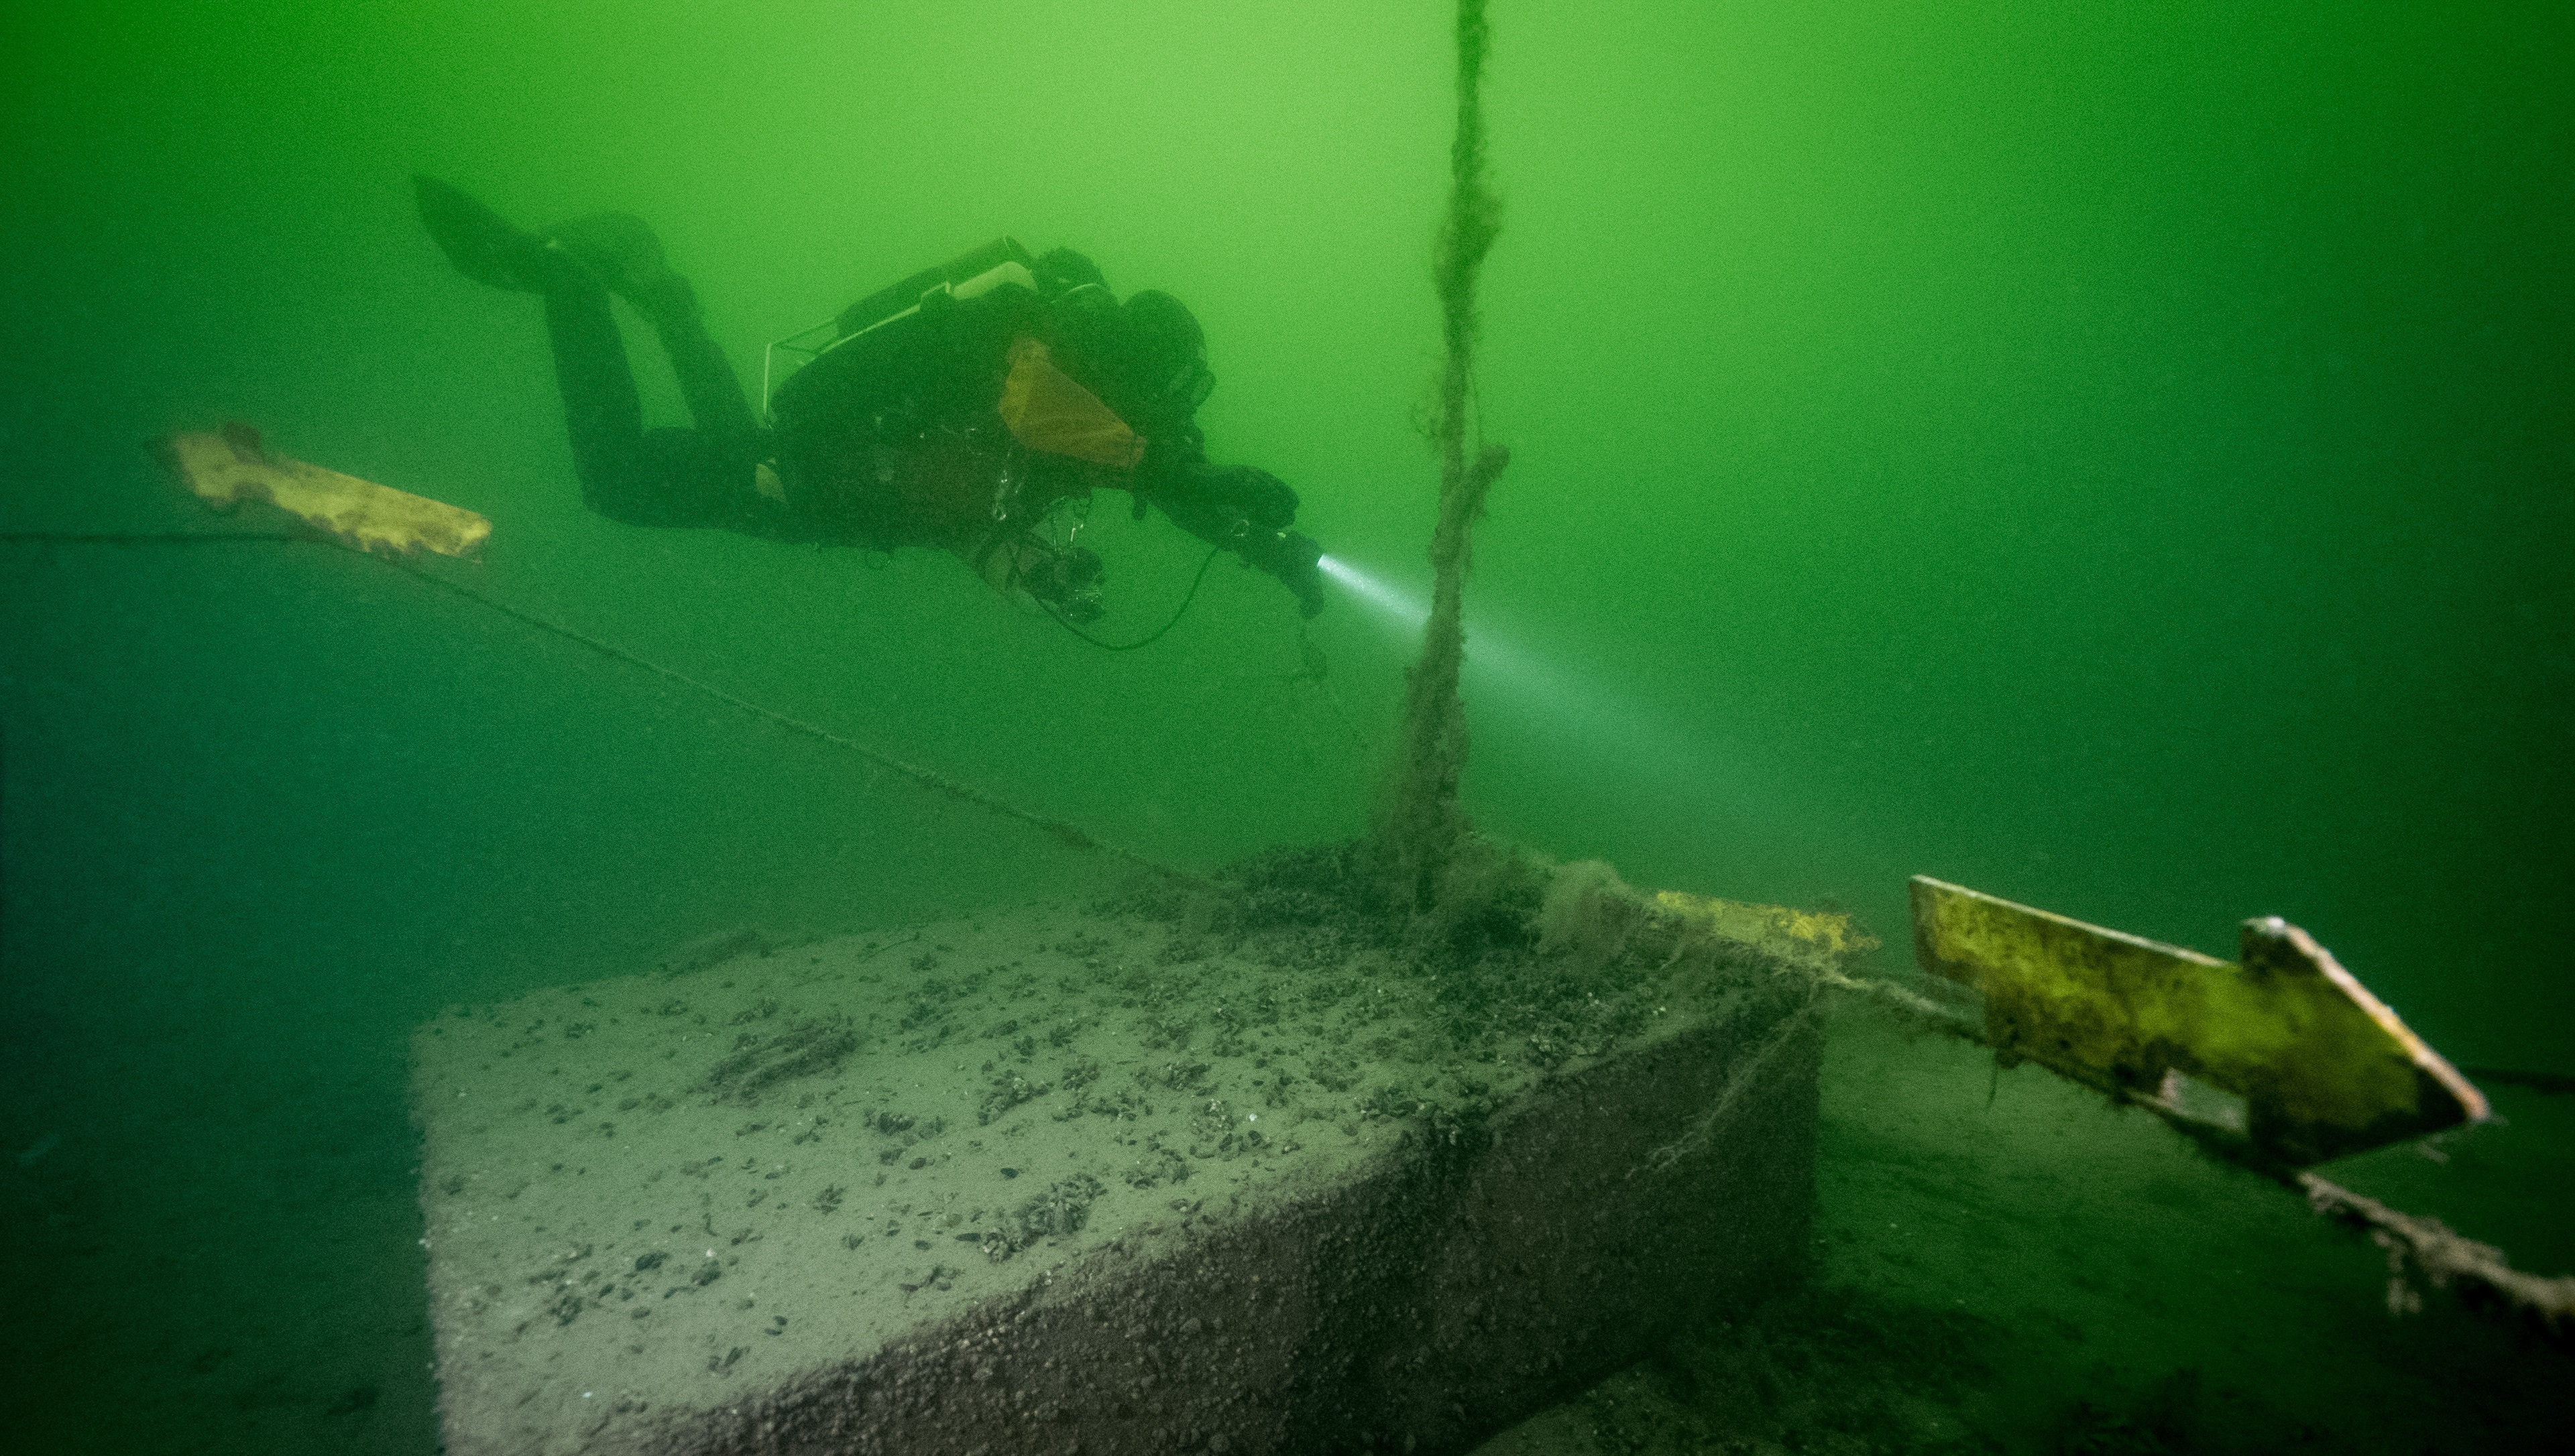 Diver following the path indicated by an arrow attached to the wreck park's guide rope.